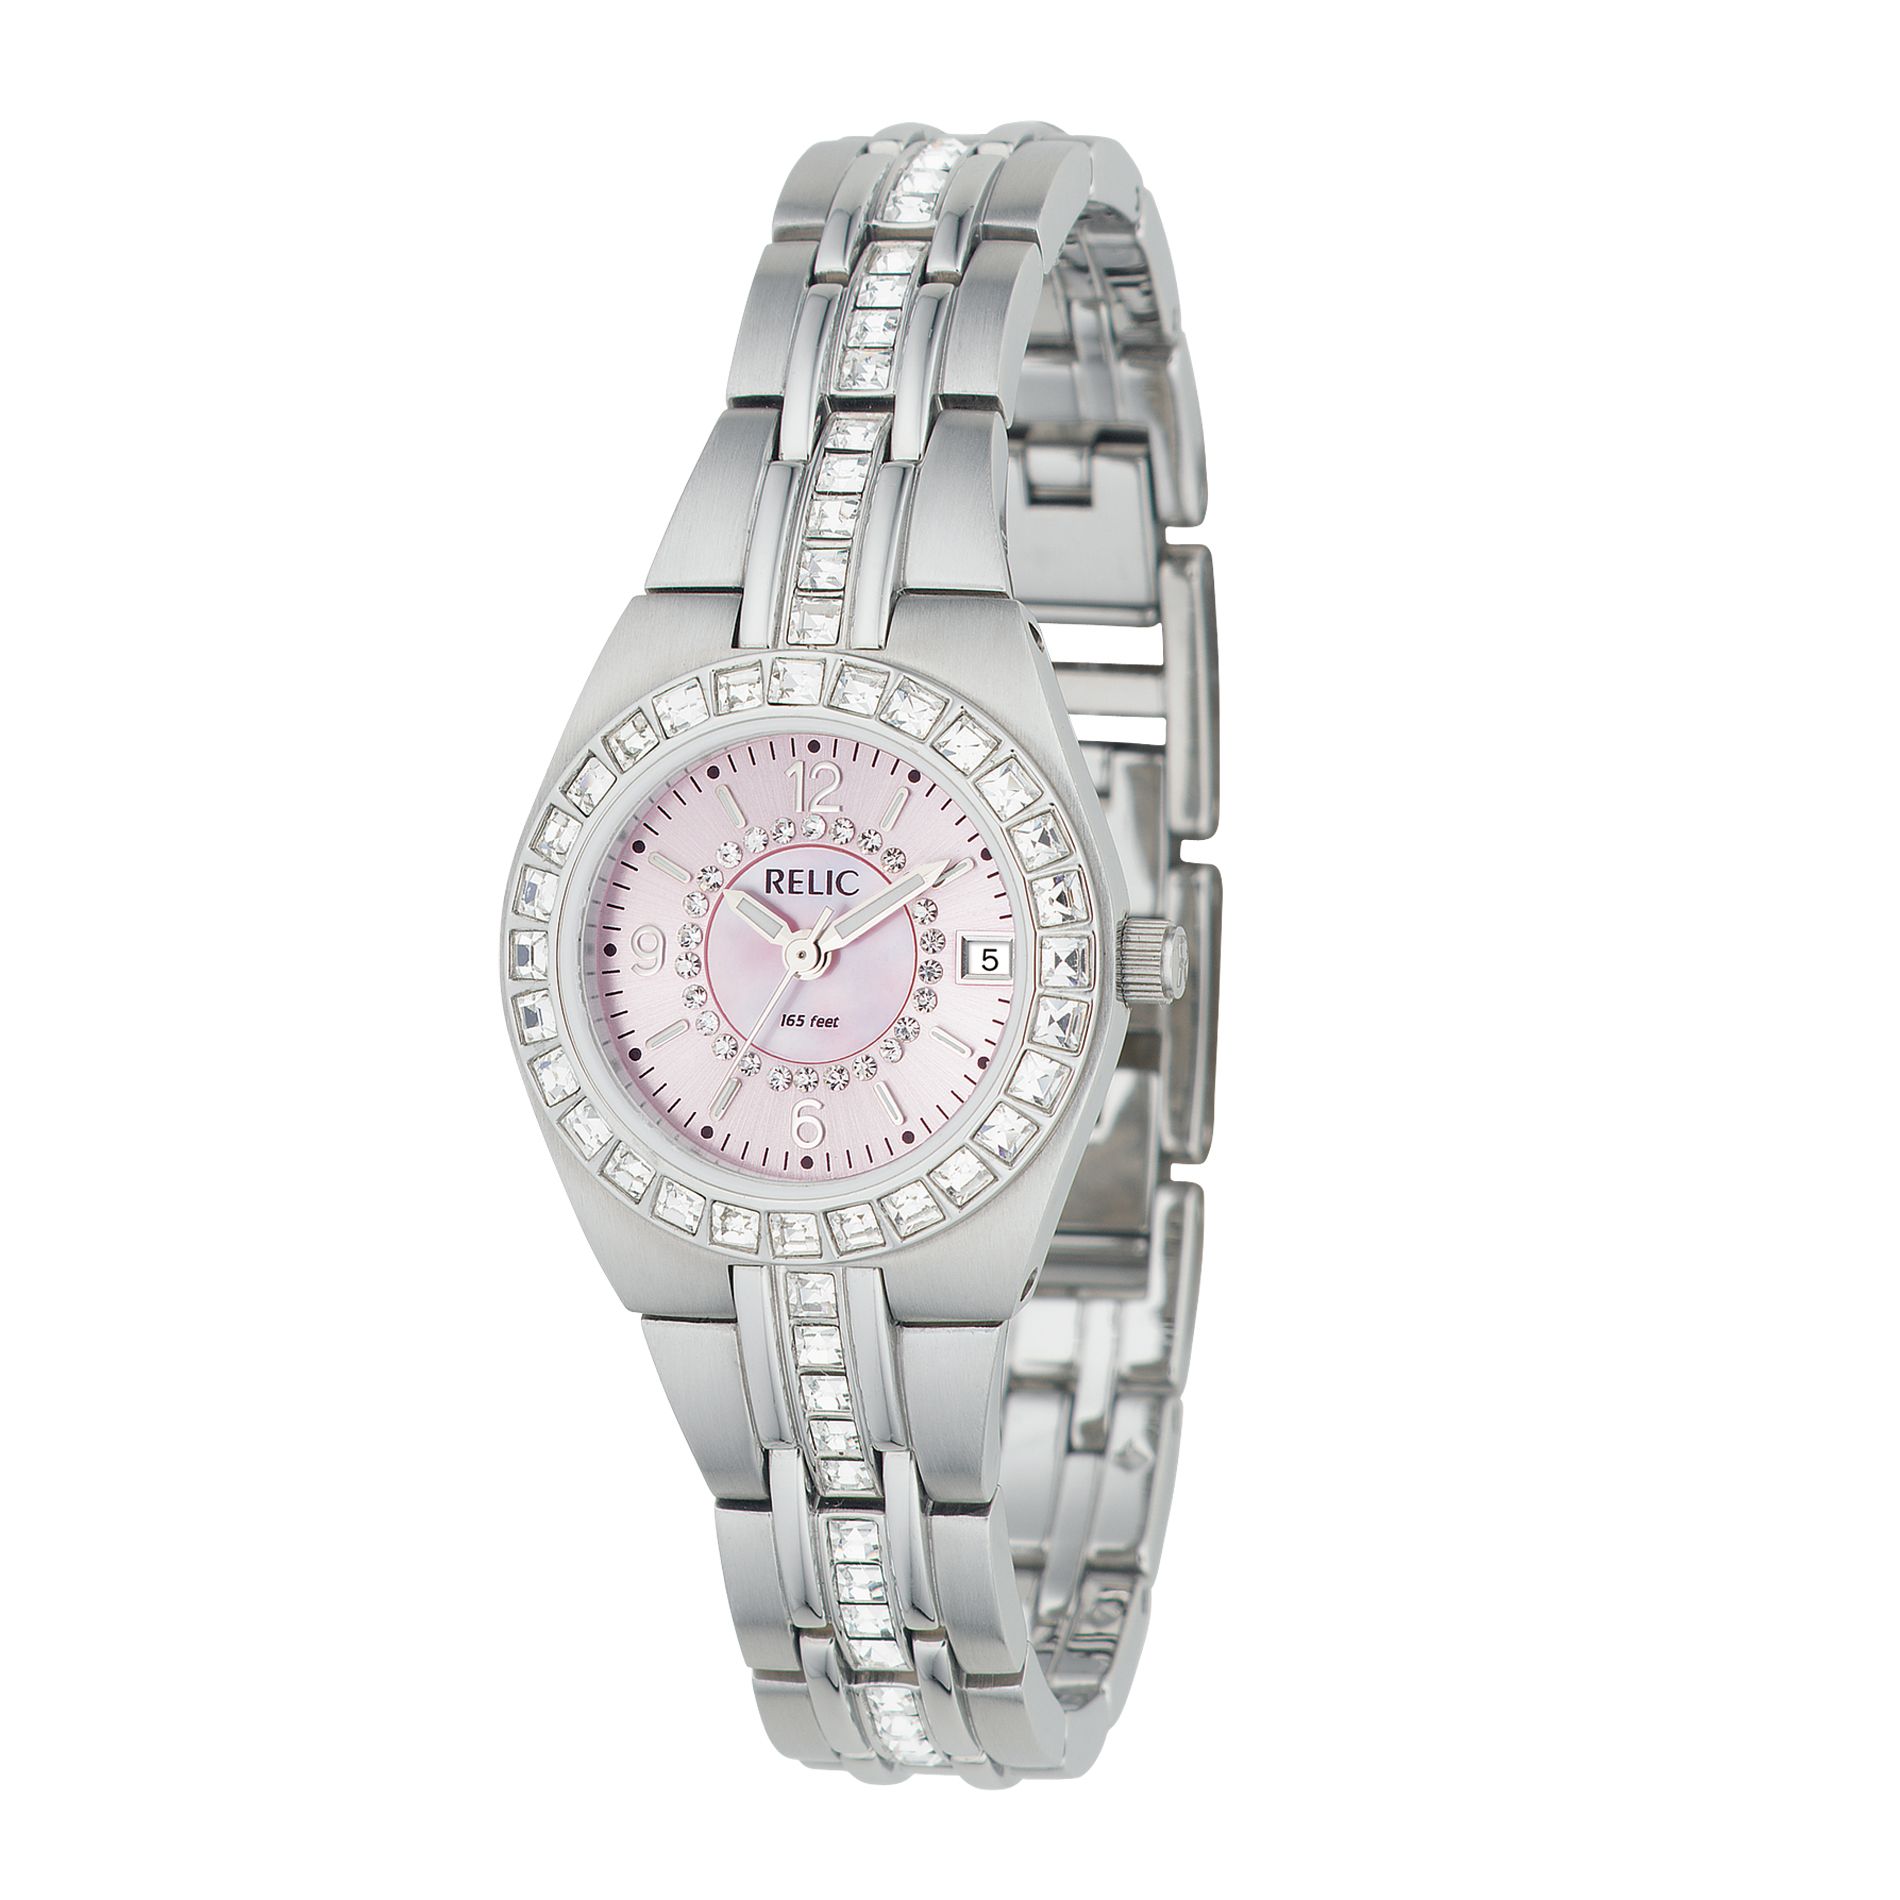 Relic Ladies Calendar Date Watch w/Crystal Pink Mother-of-Pearl Dial & ST Link Band